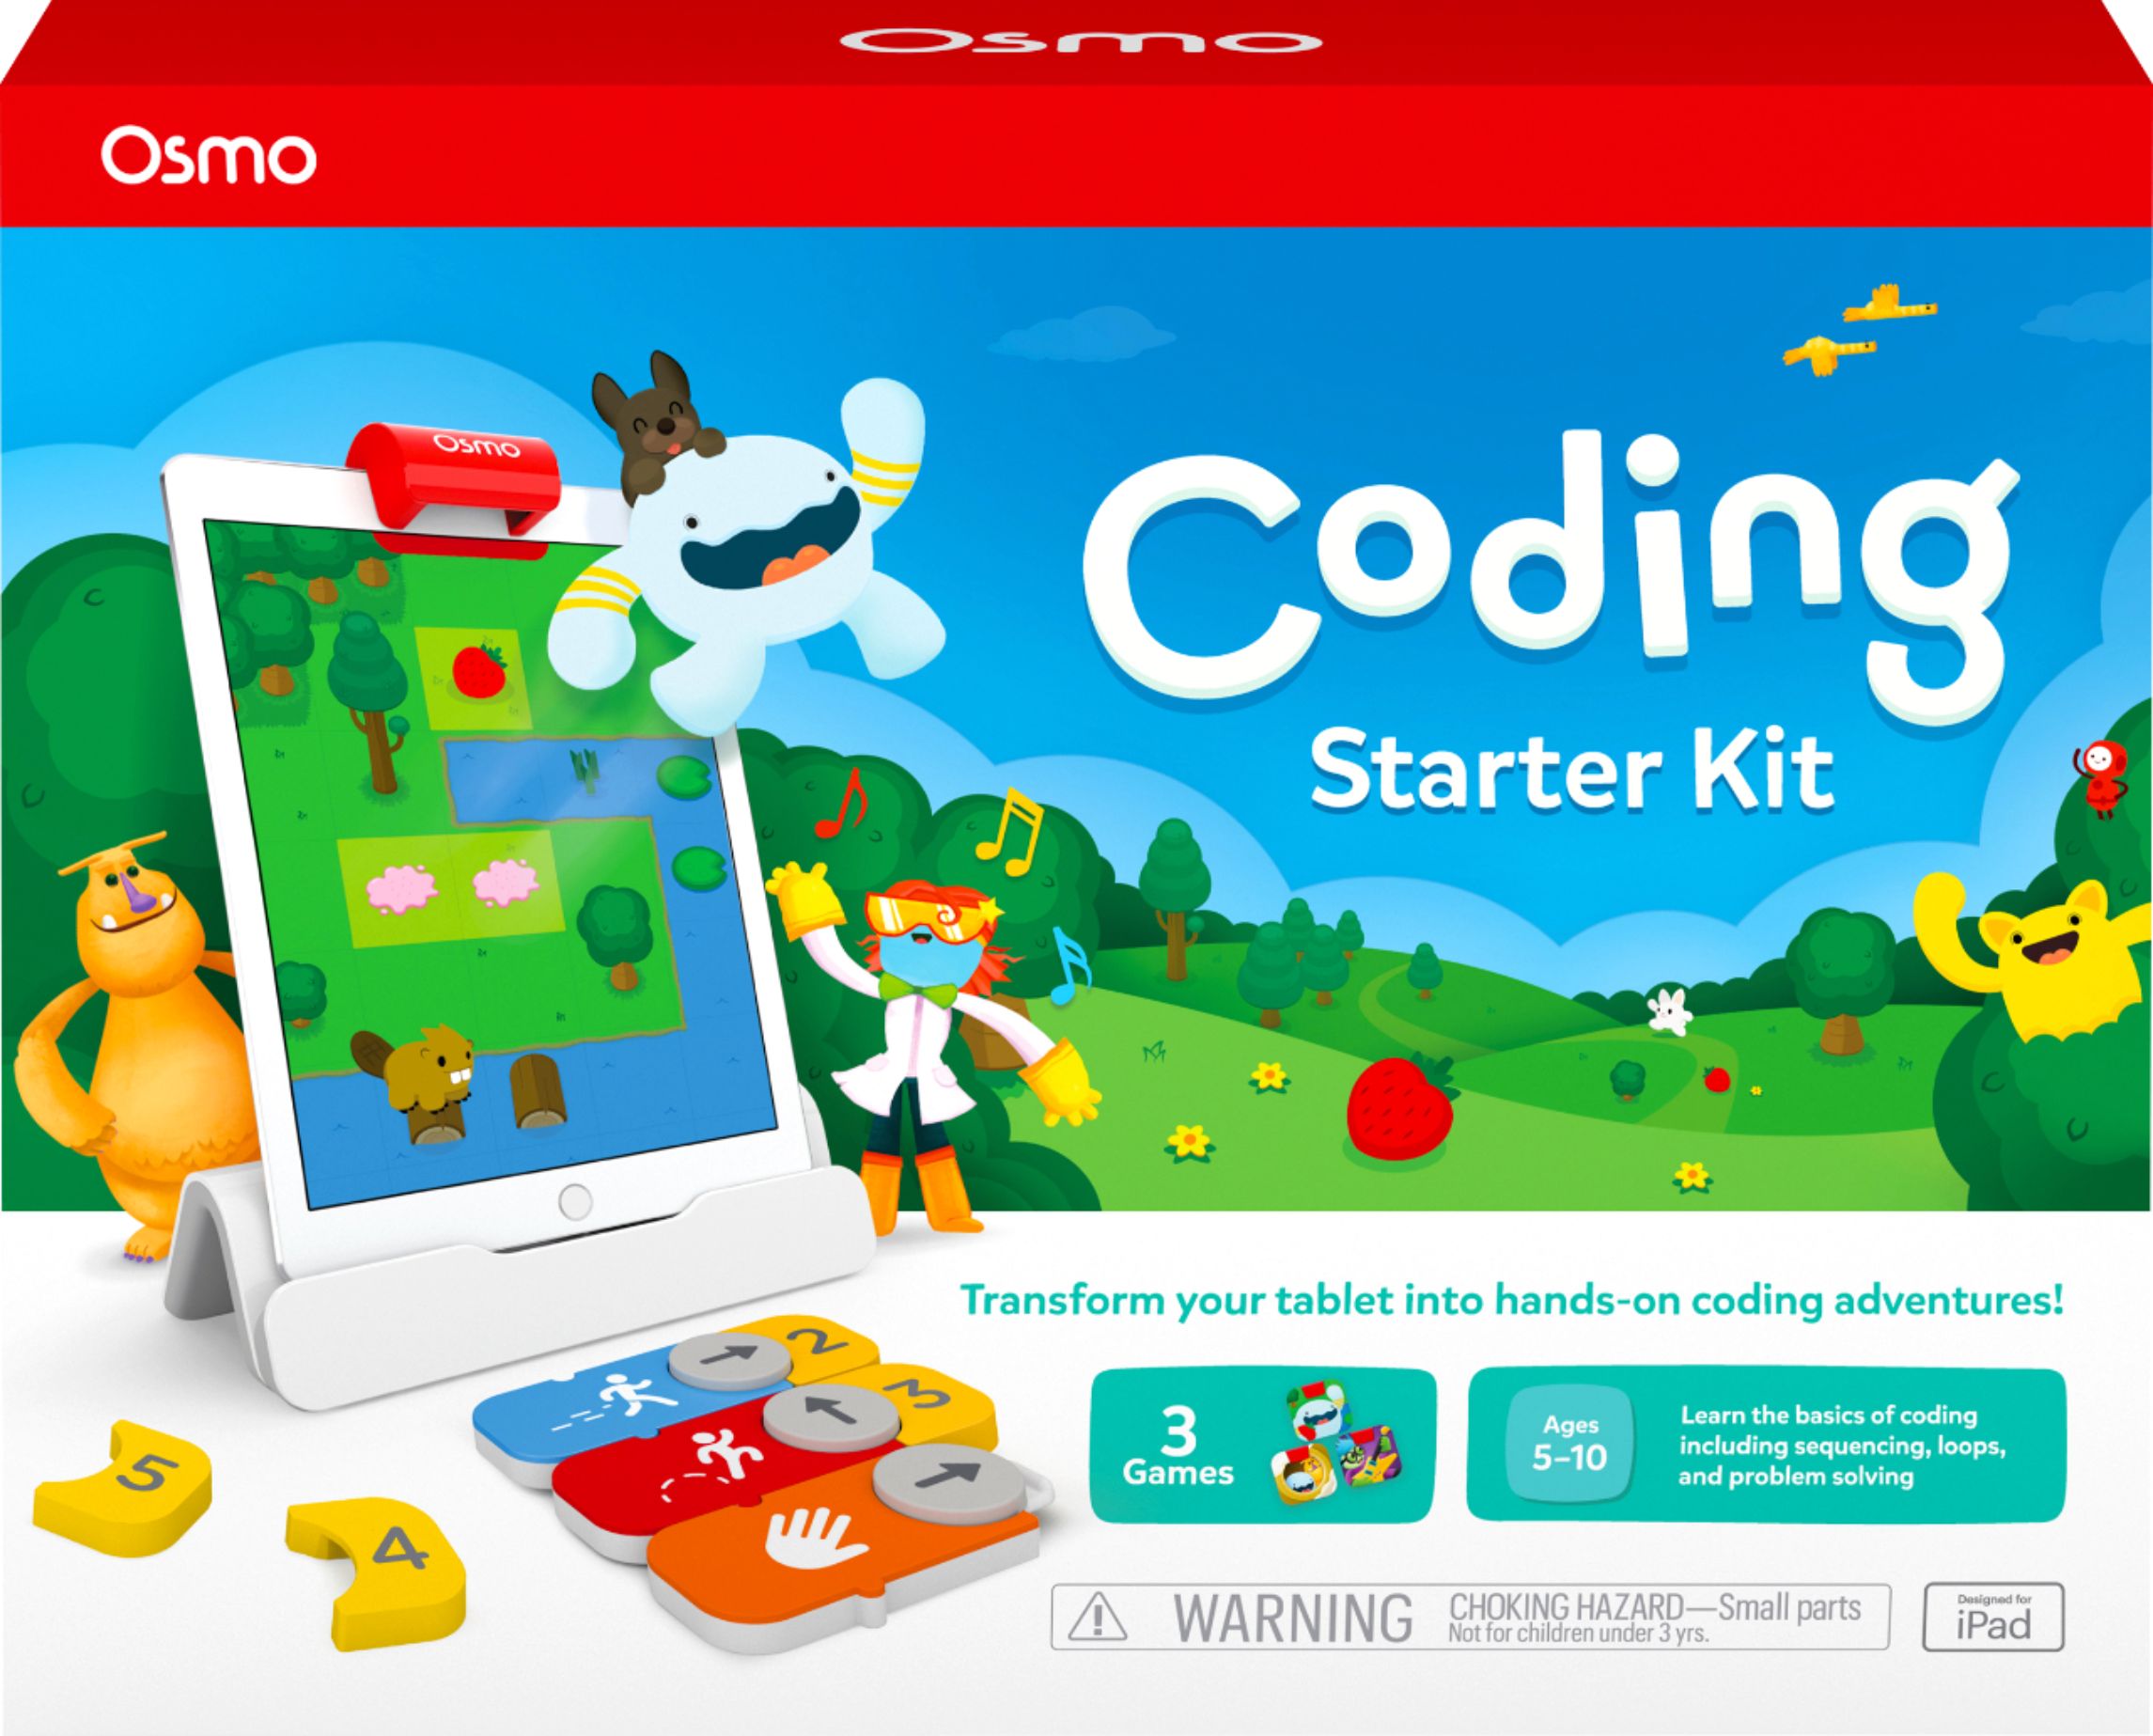 Osmo Ages 5-10+ Coding Basics & Coding Puzzles Fire Tablet Base Included Learn to Code 3 Hands-on Learning Games Coding Starter Kit for Fire Tablet 